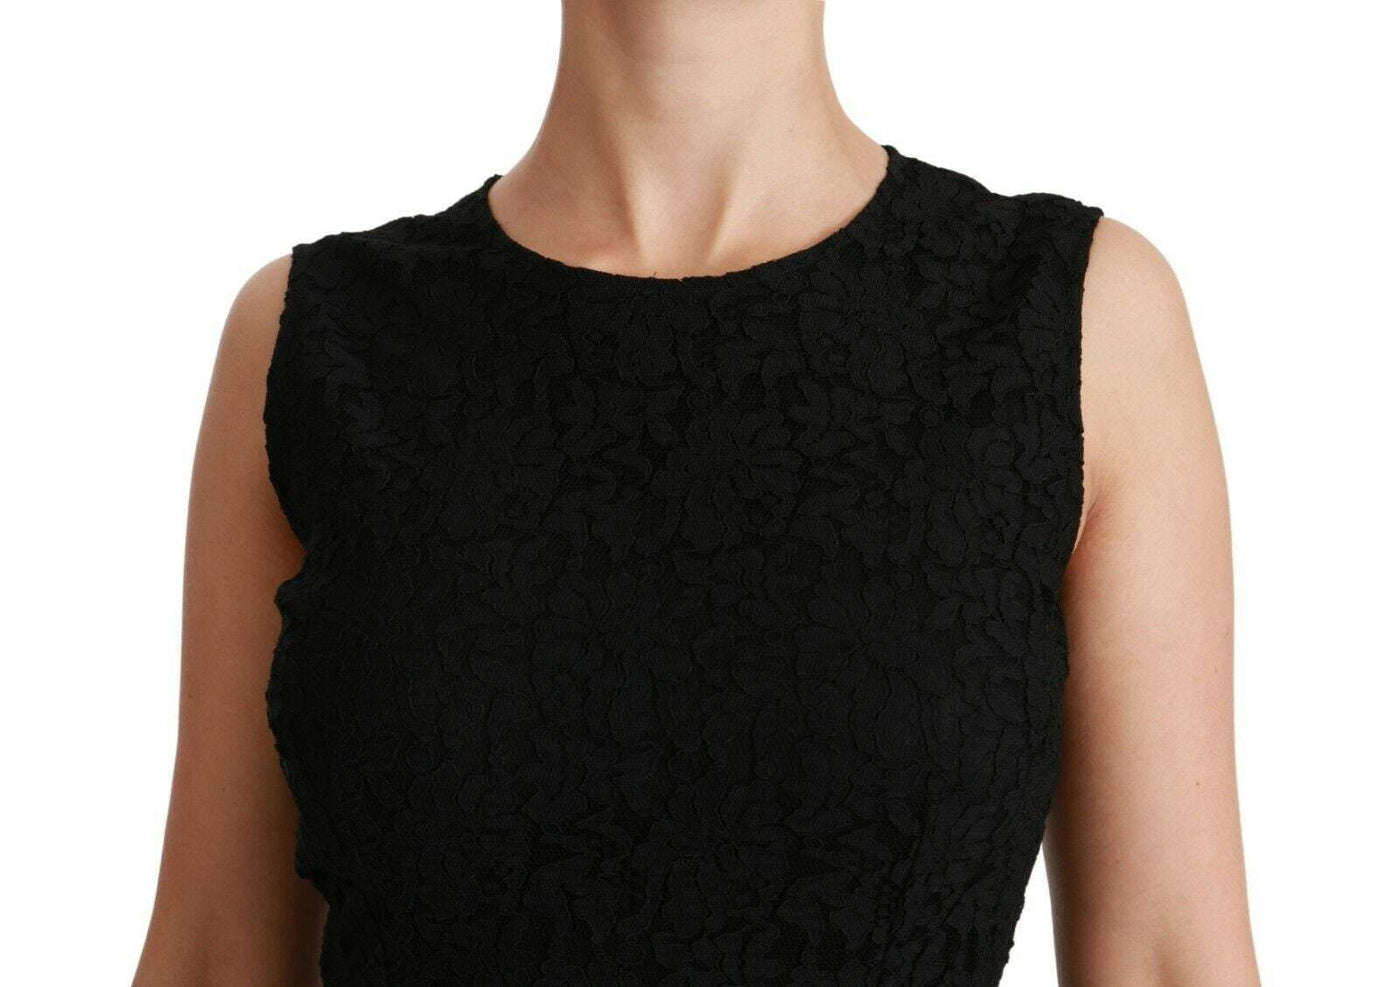 Dolce & Gabbana Black Floral Lace Sheath Gown Dress #women, Black, Dolce & Gabbana, Dresses - Women - Clothing, feed-agegroup-adult, feed-color-black, feed-gender-female, IT38|XS, IT40|S, IT42|M, IT44|L, IT46|XL, IT48 | XL, IT50 | XXL, Men - New Arrivals at SEYMAYKA